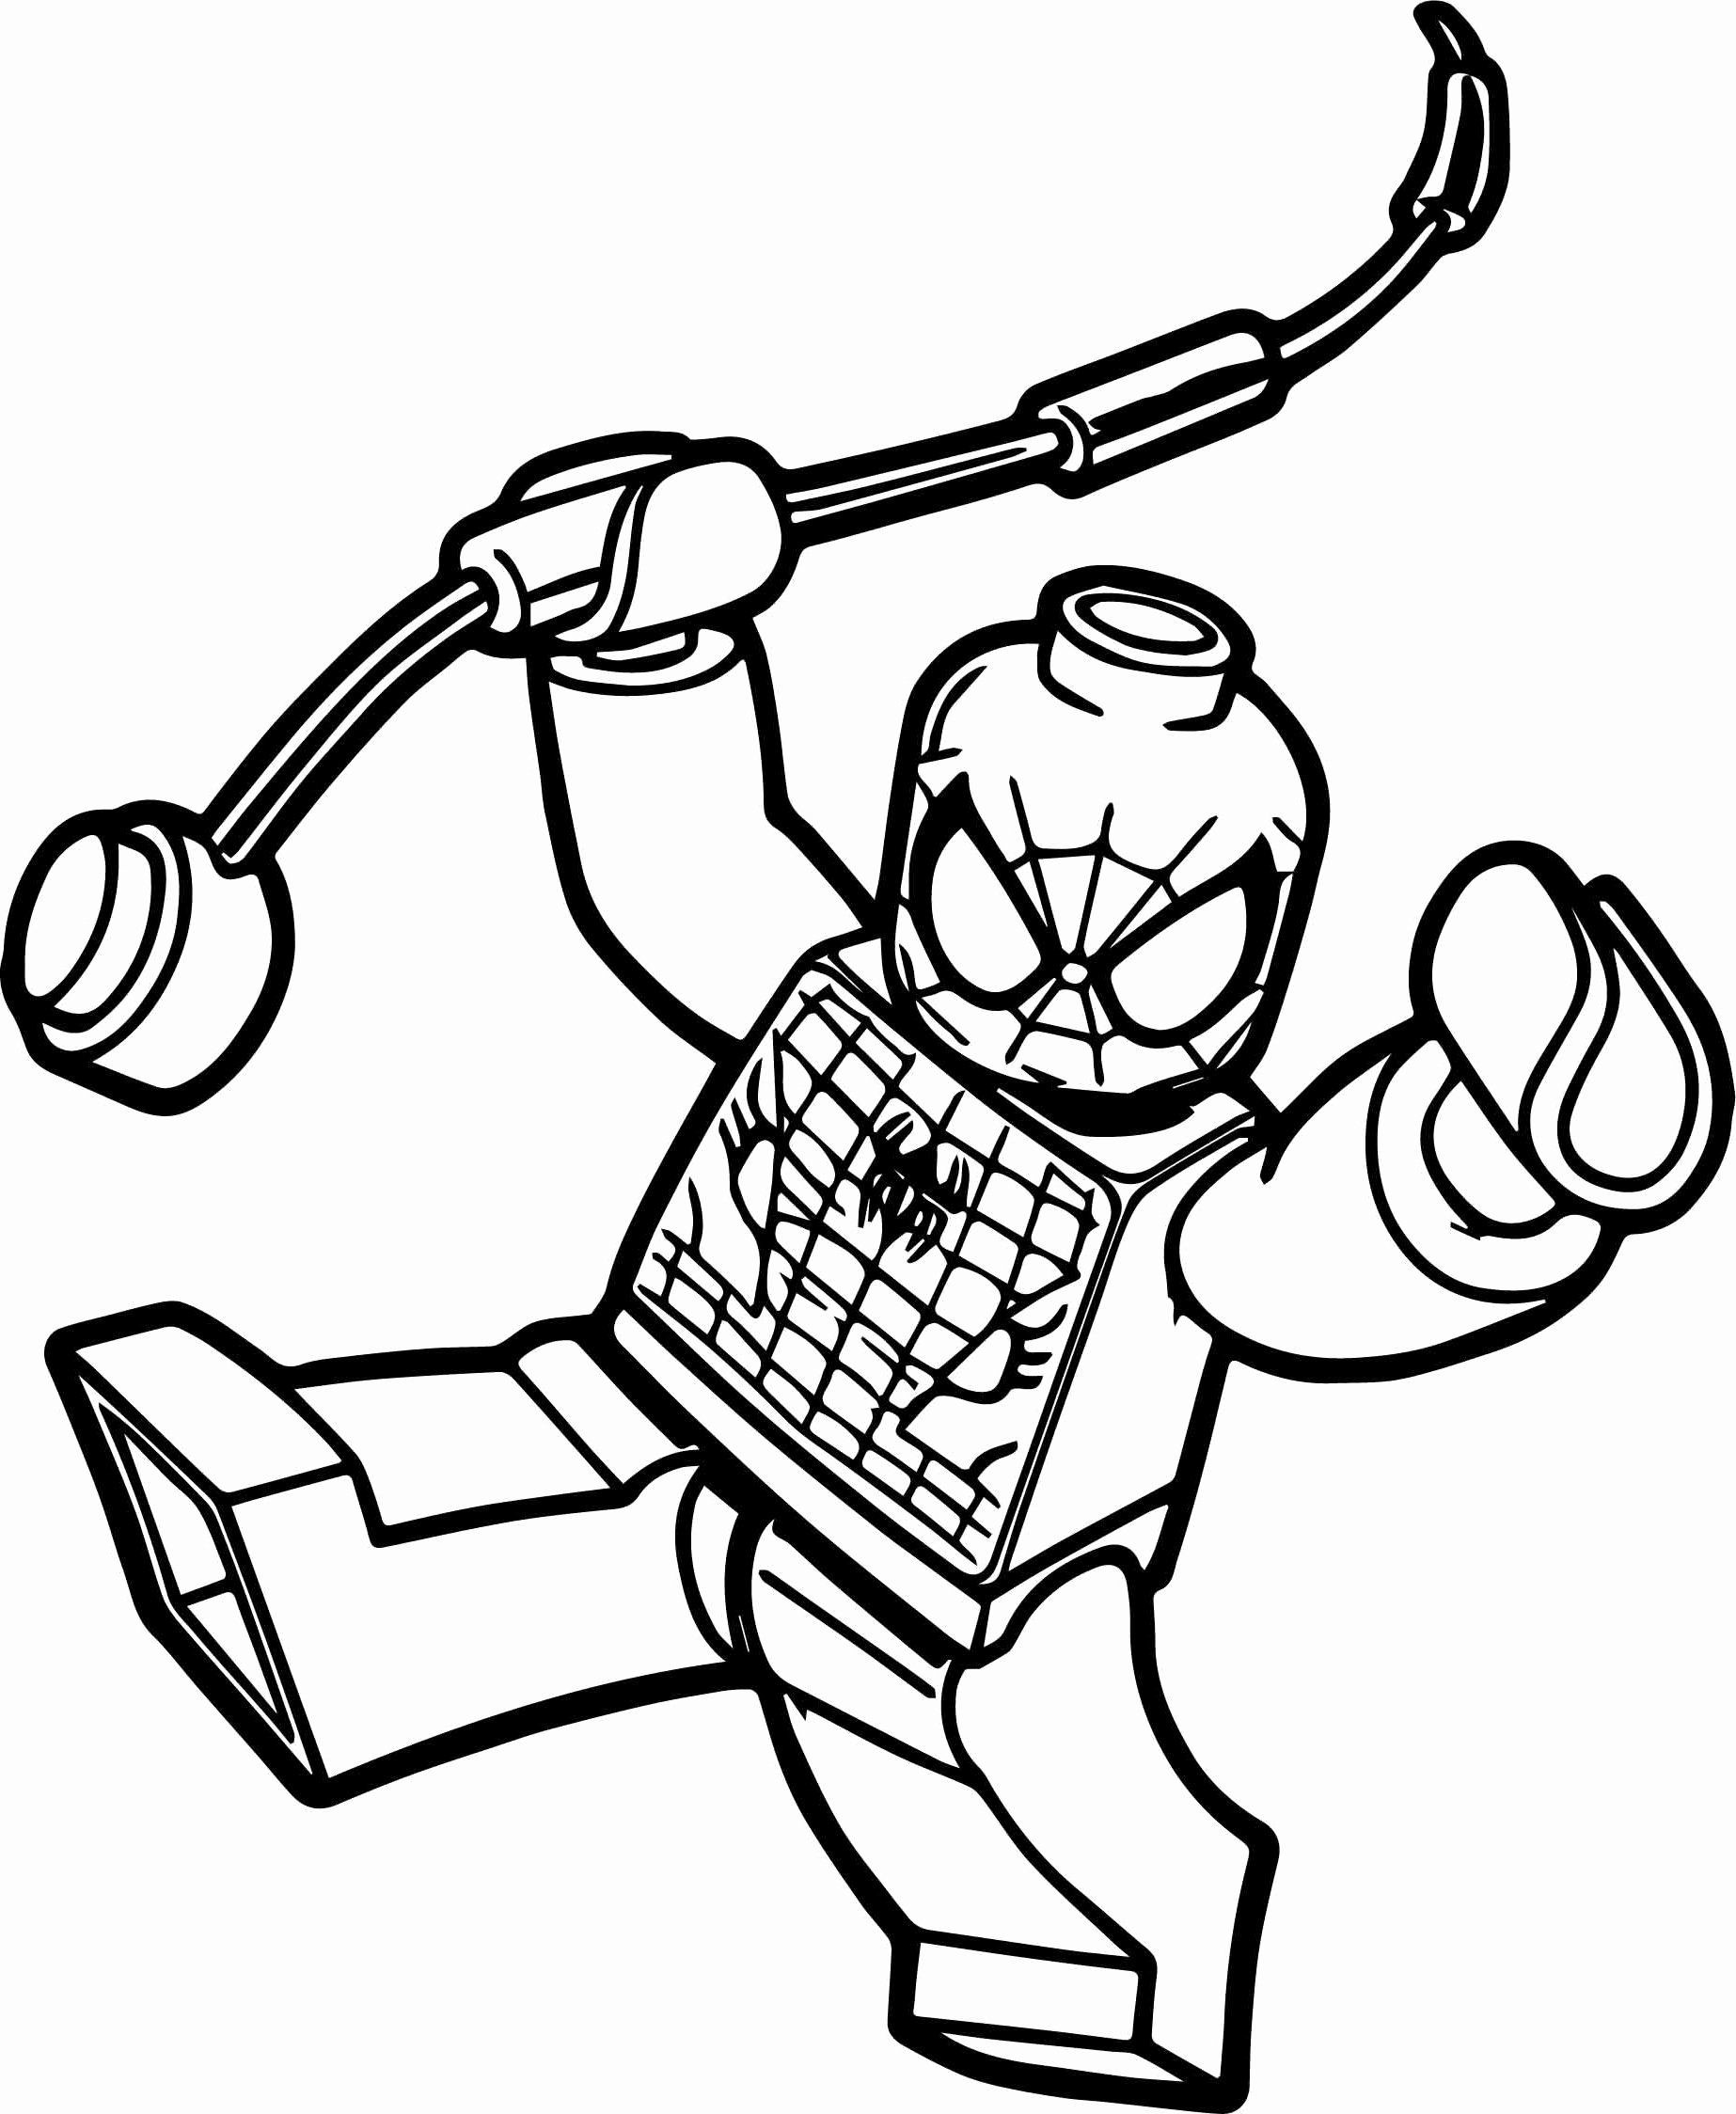 coloring : Spiderman Coloring Sheet Fresh 28 Lego Spiderman Coloring Page  In 2020 Spiderman Coloring Sheet ~ queens